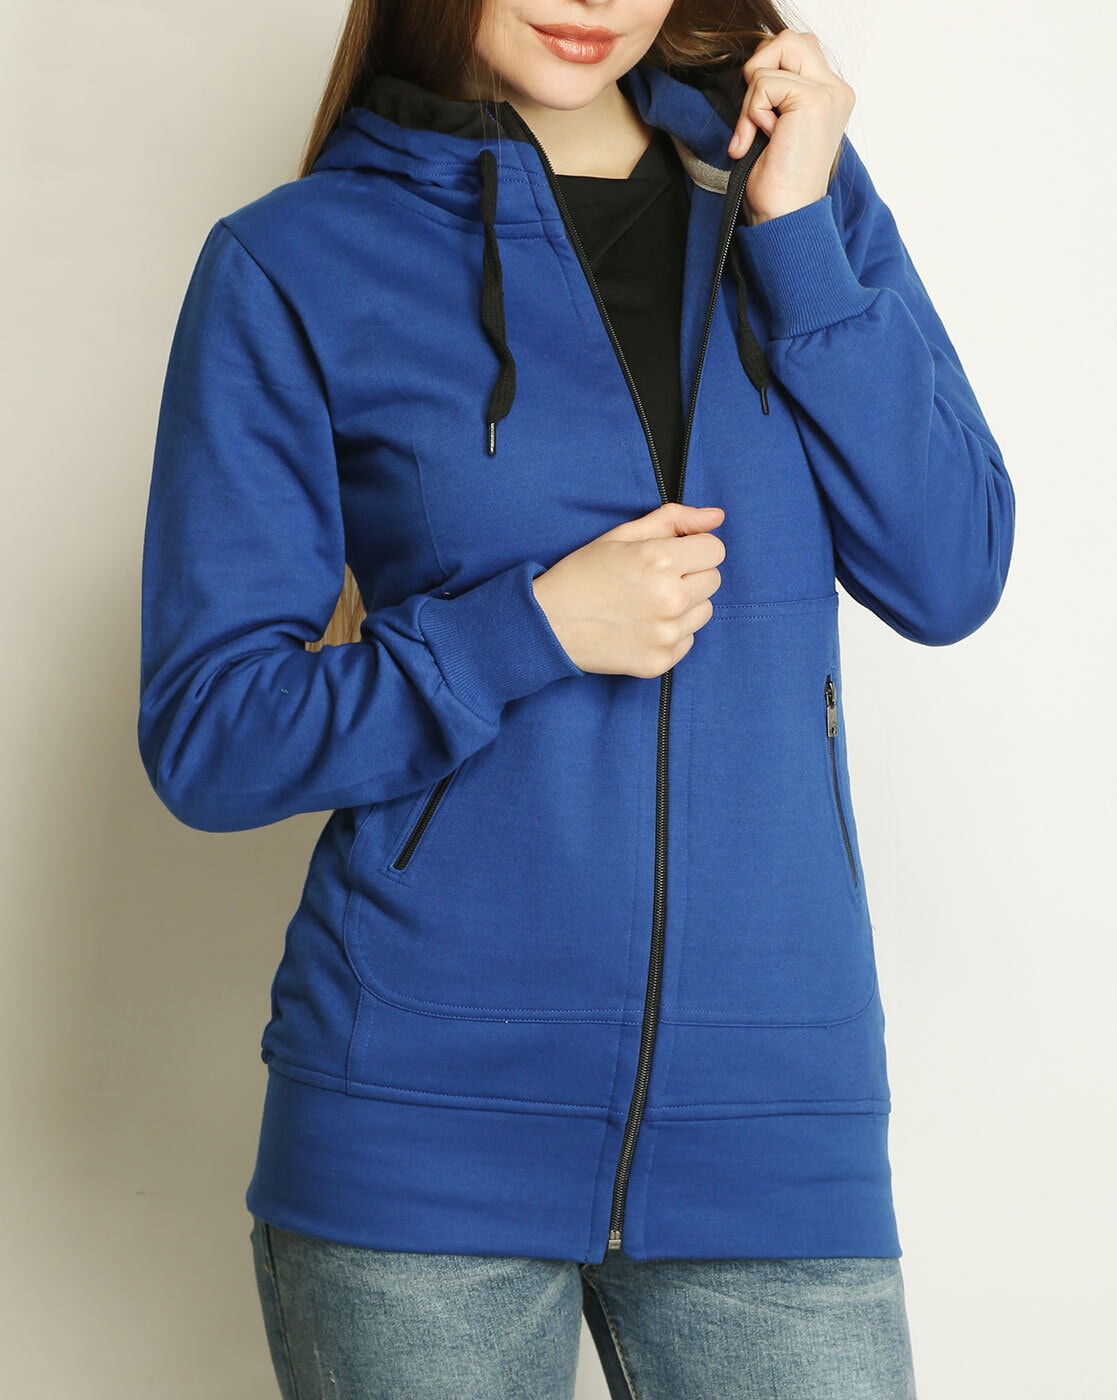 Buy RARE Women Casual Royal Blue Hooded Solid Padded Jacket online